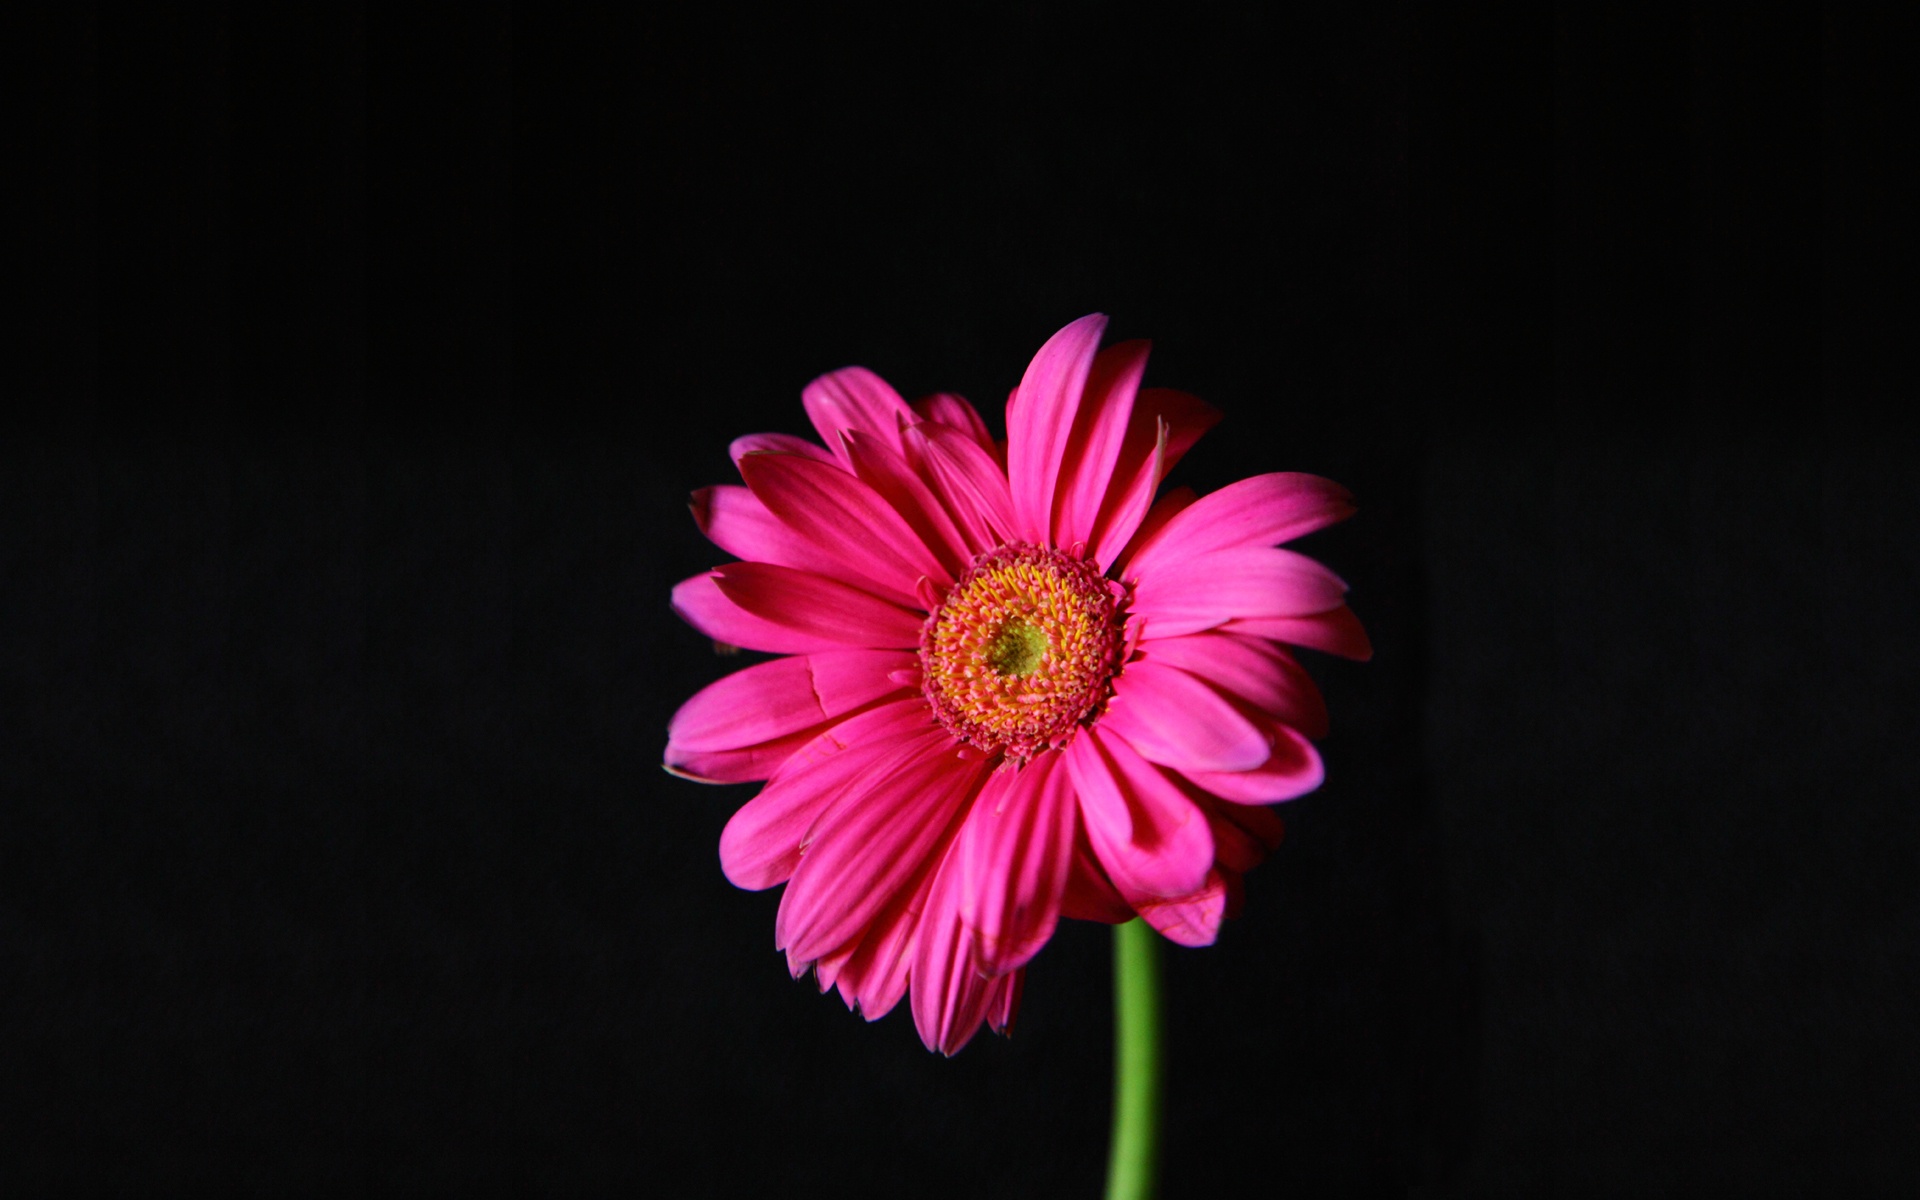 Hot Pink Gerber Daisy 1920x1200 wallpaper download page 369291